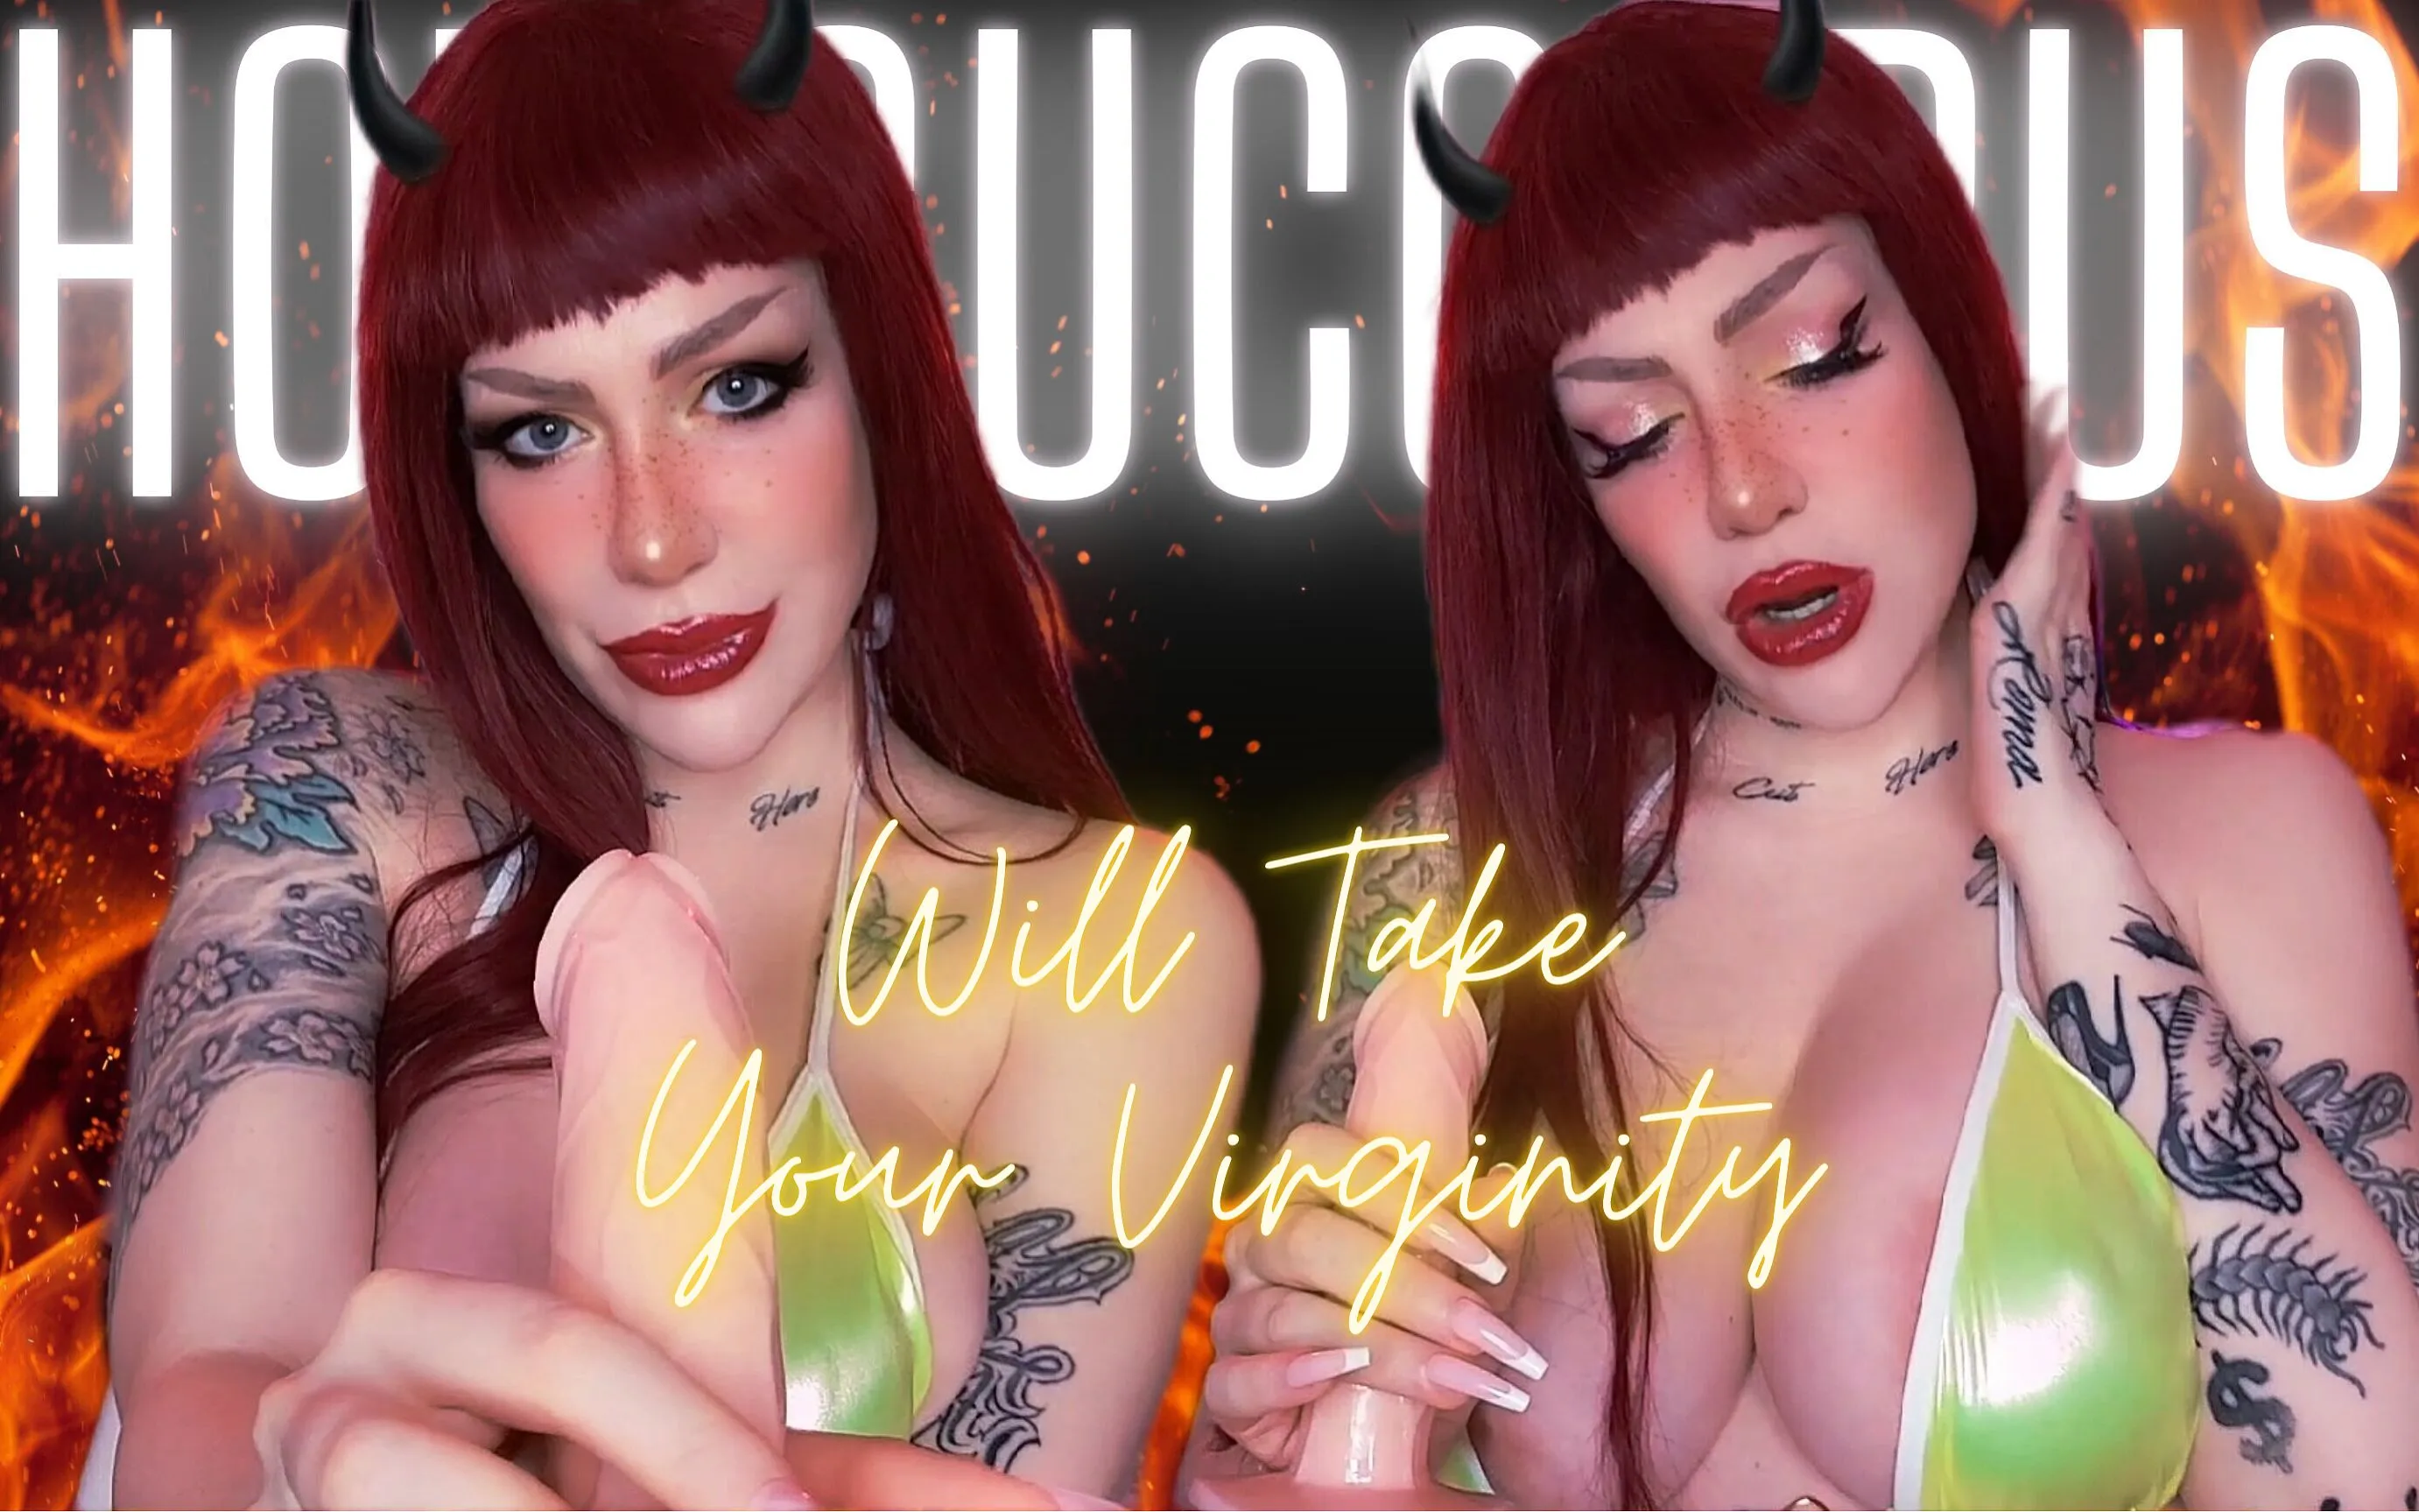 Hot succubus will take your virginity by LDB Mistress Faphouse